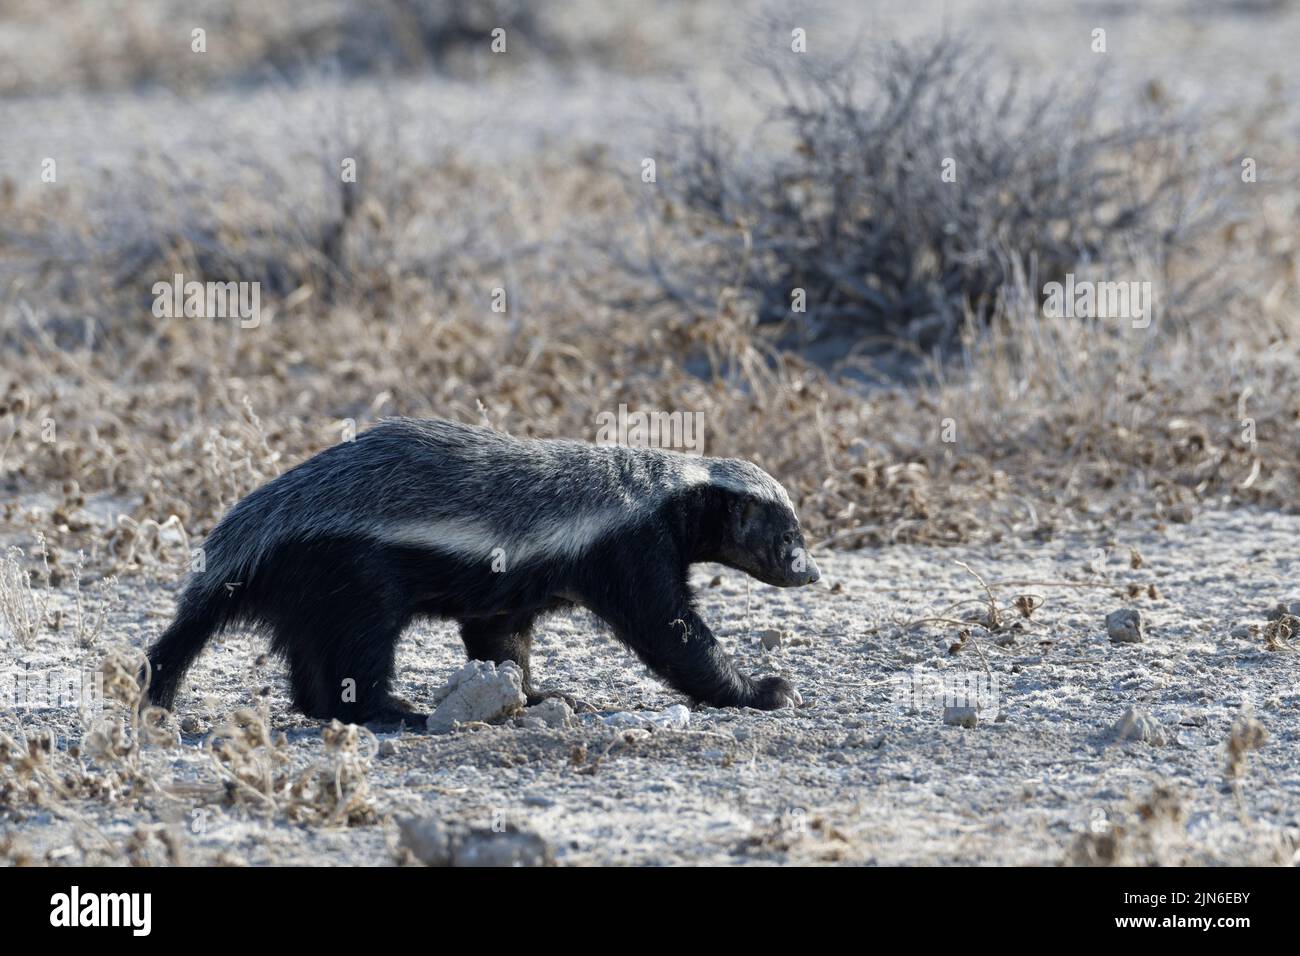 Honey badger (Mellivora capensis), walking adult male, in search of prey, Etosha National Park, Namibia, Africa Stock Photo